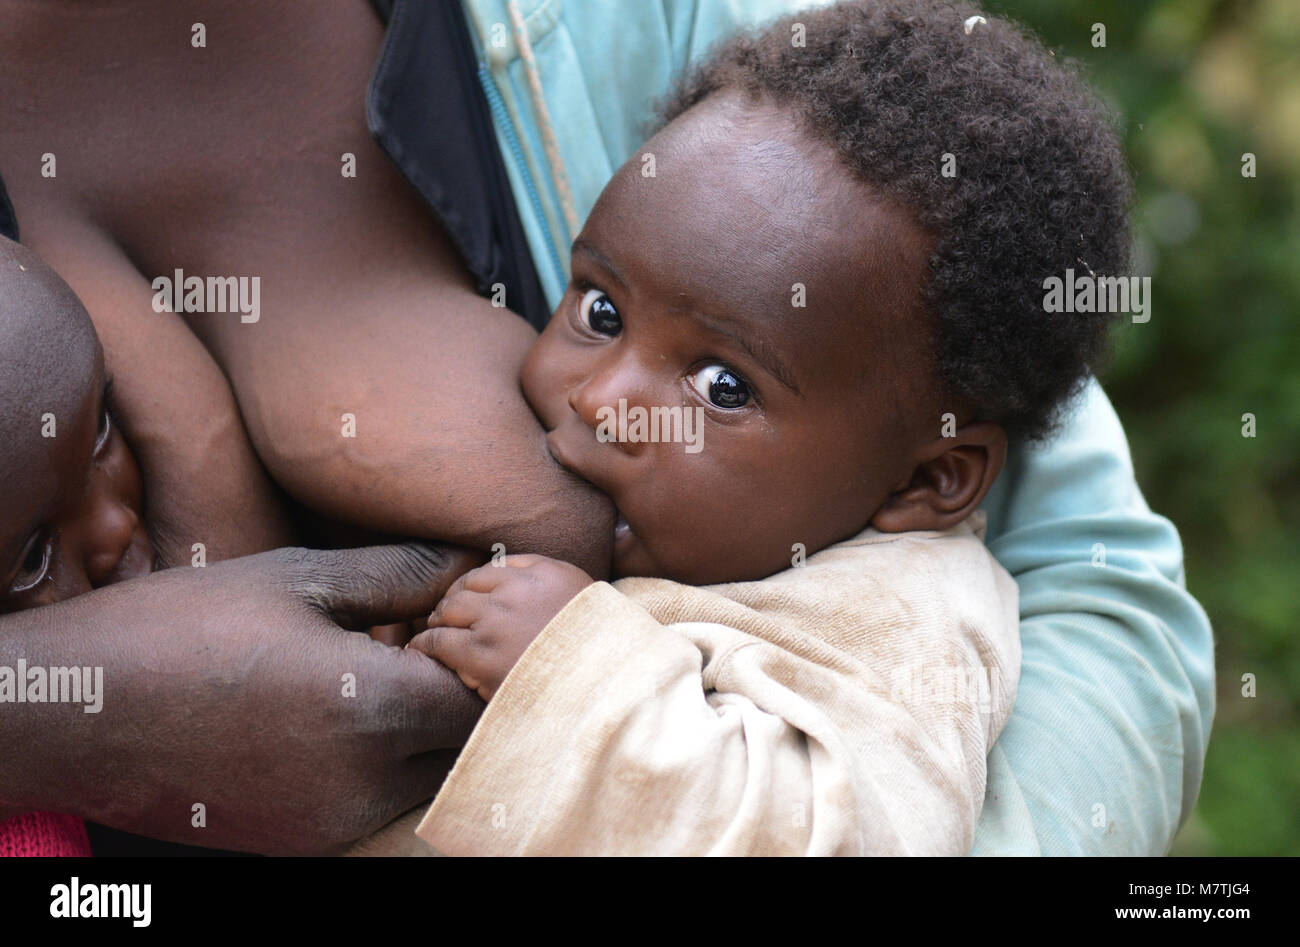 A Congolese woman breastfeeding her twins. Stock Photo